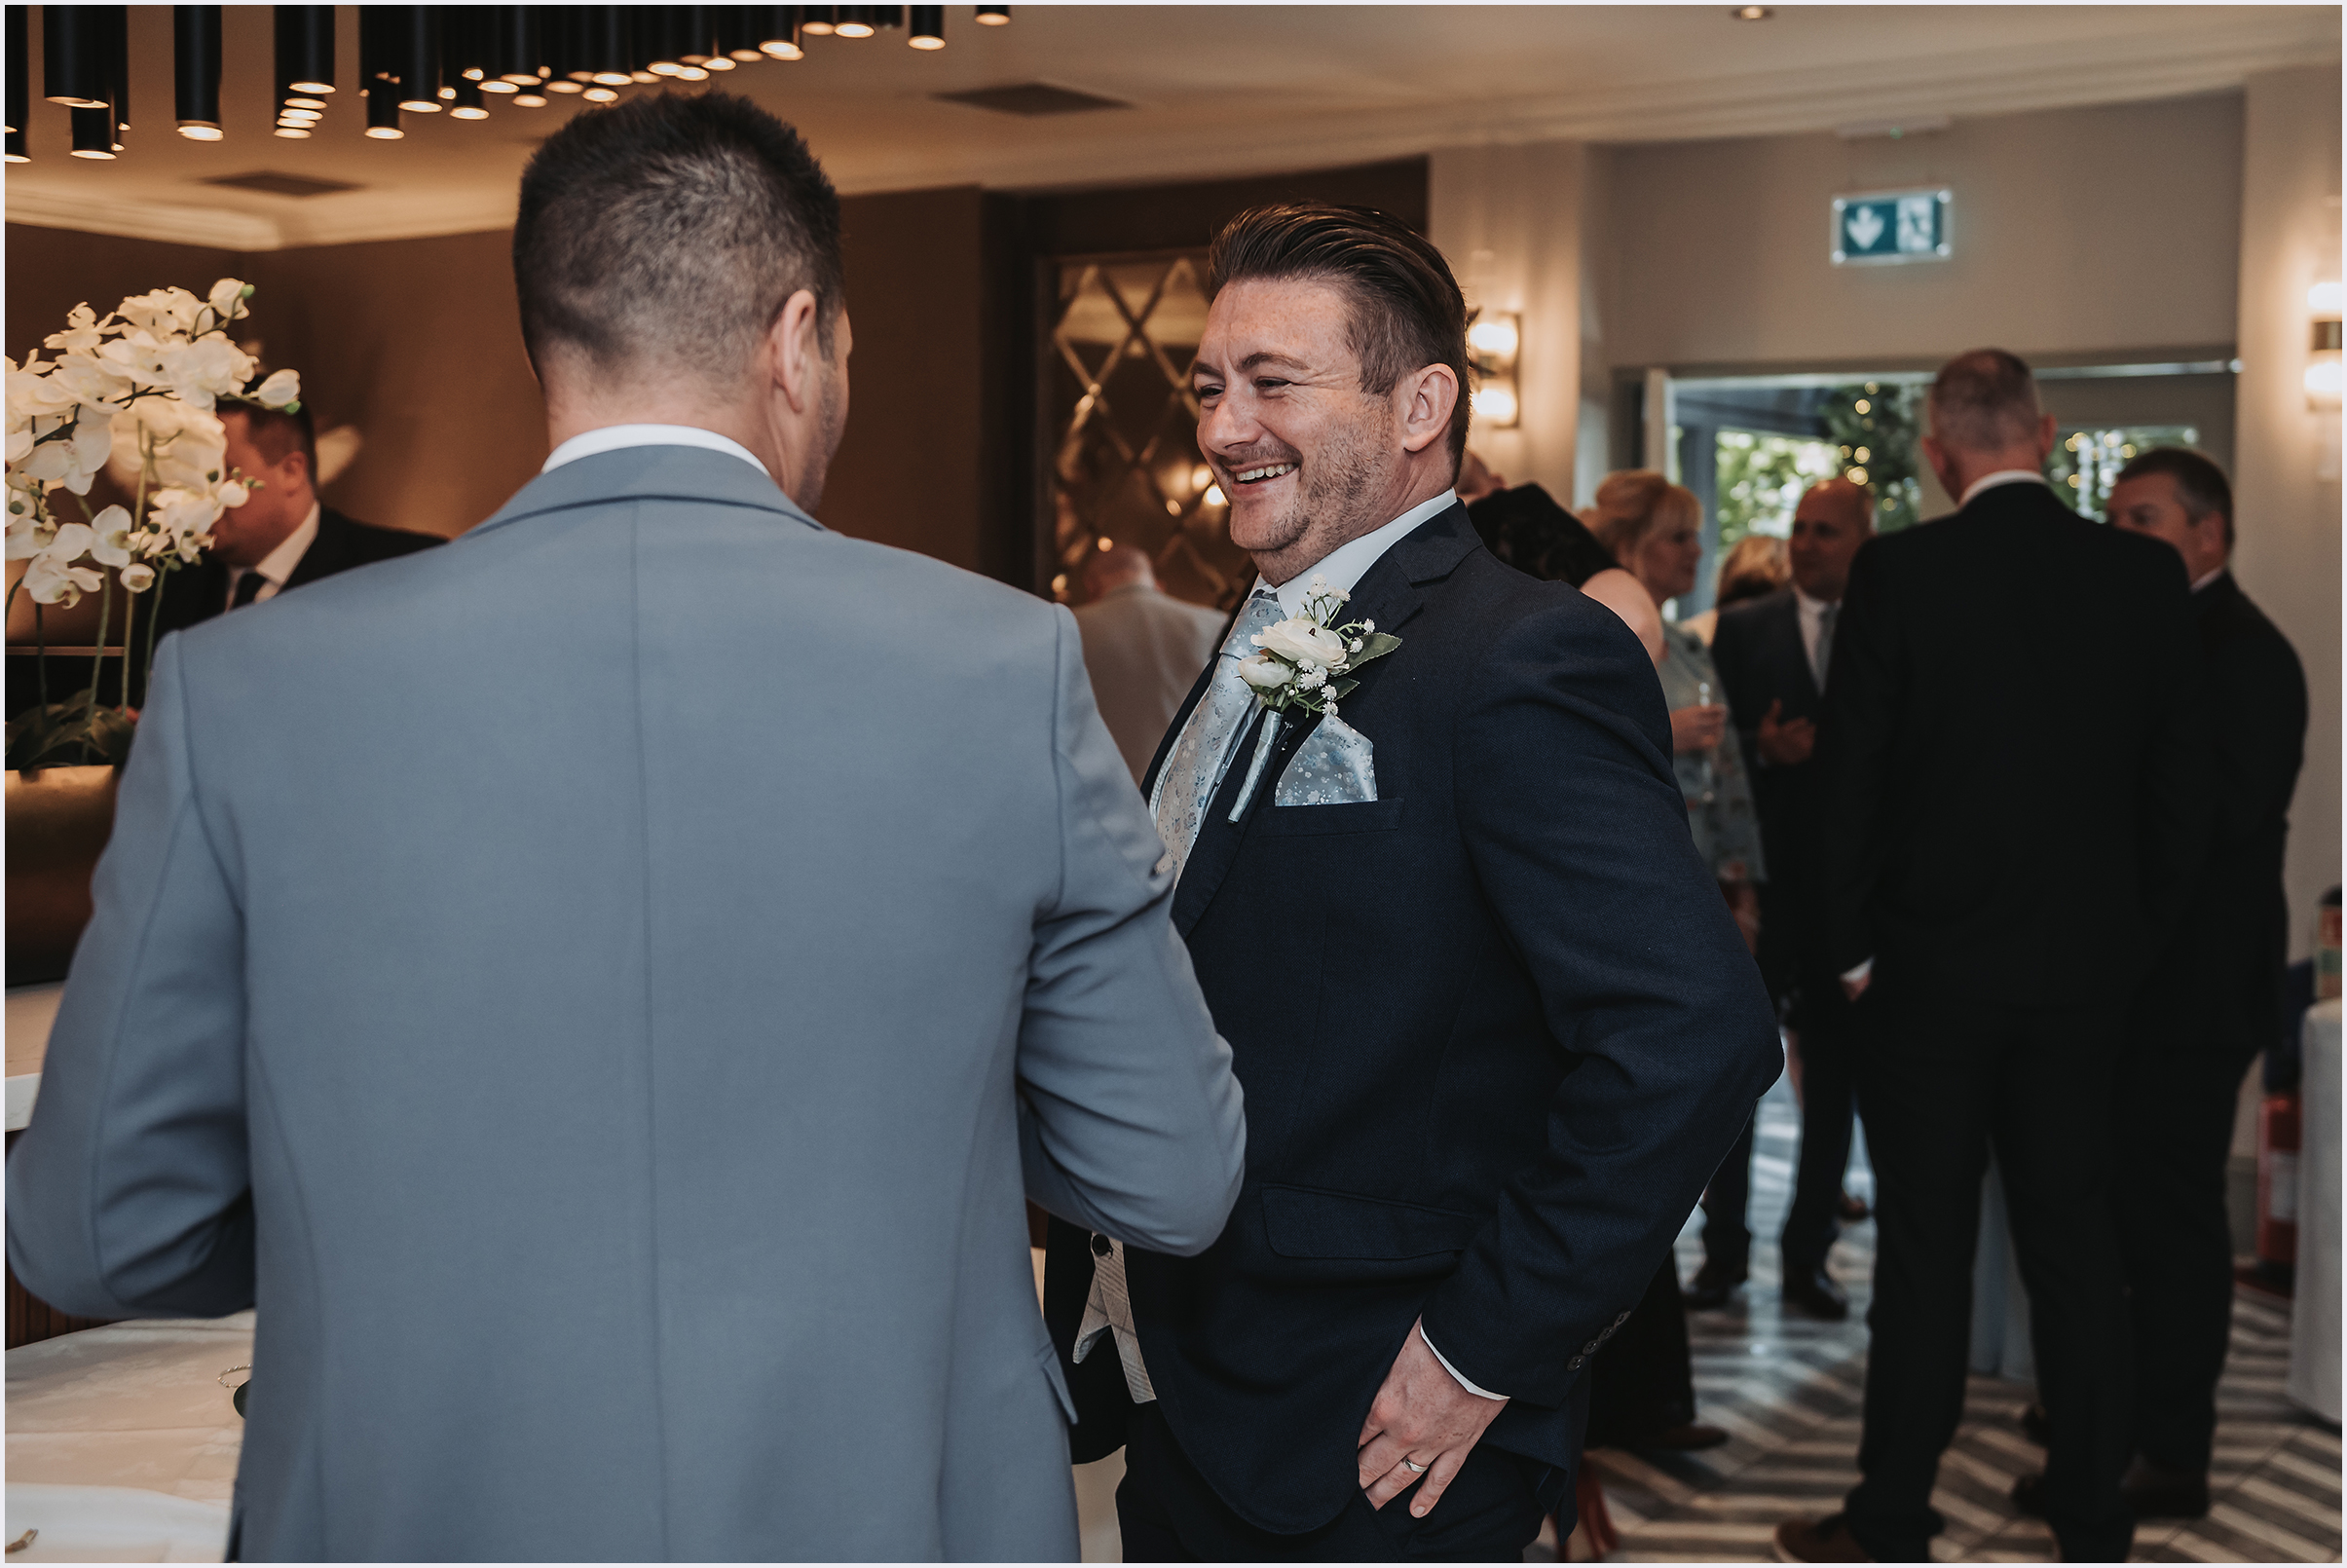 A groom chatting happily with one of his guests during the drinks reception at a wedding.